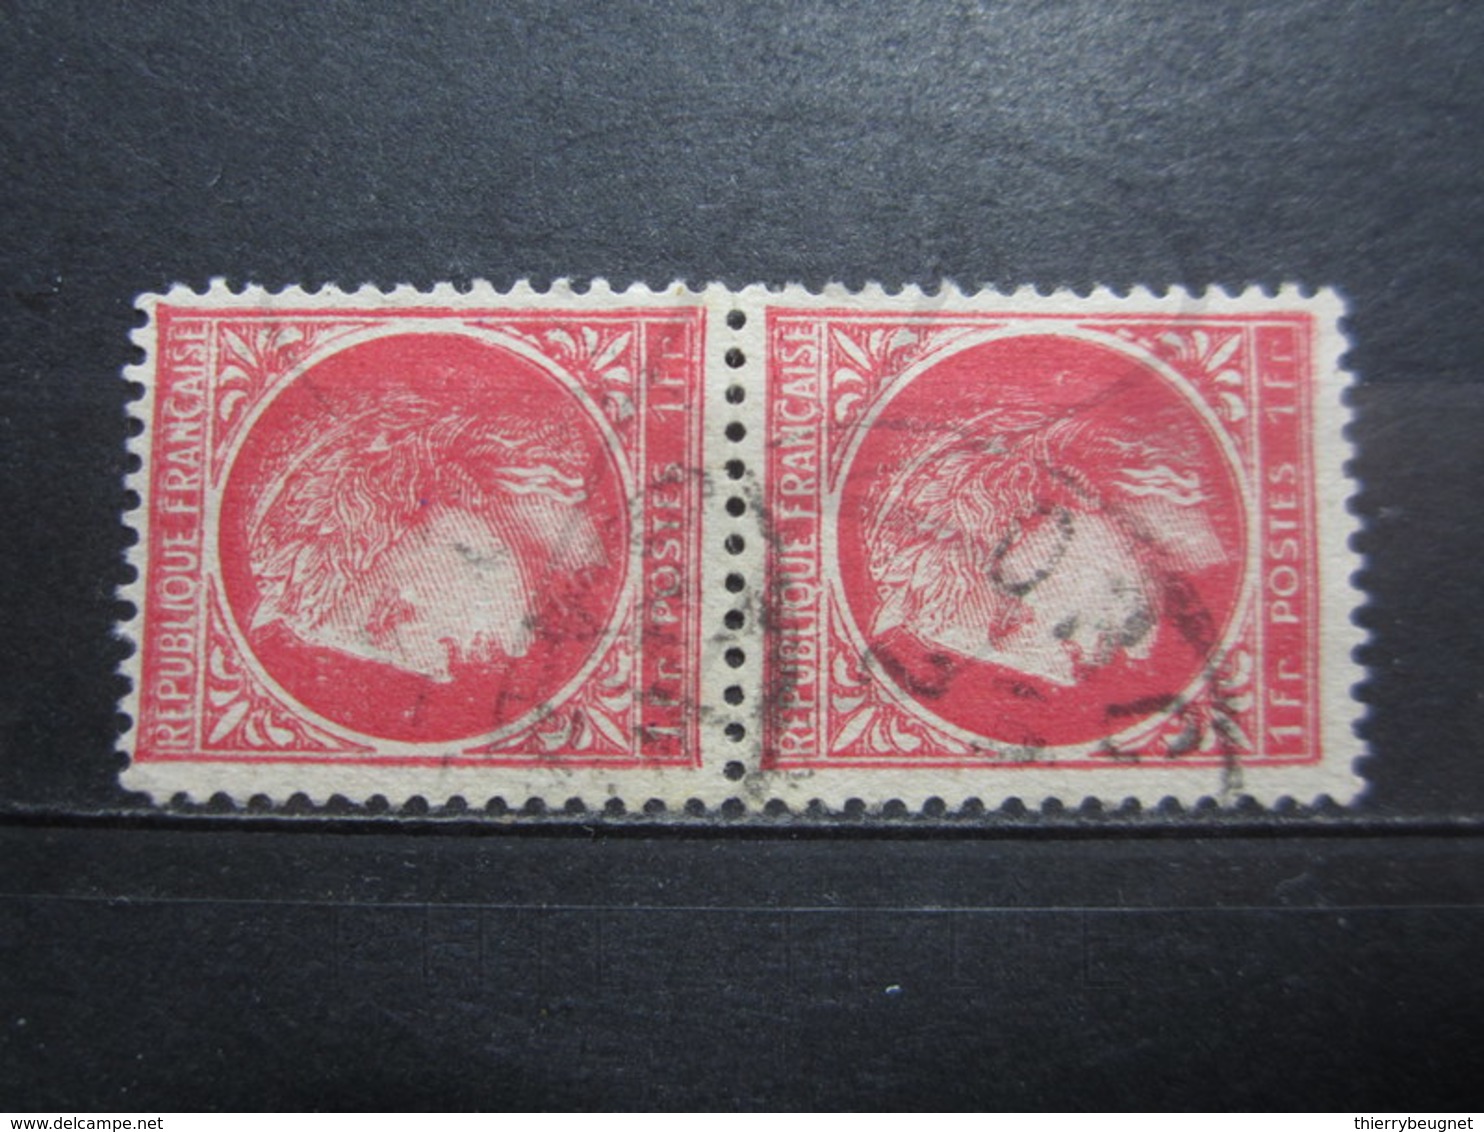 VEND BEAUX TIMBRES FRANCE N° 676 EN PAIRE , IMPRESSION DECALEE !!! - Gebraucht